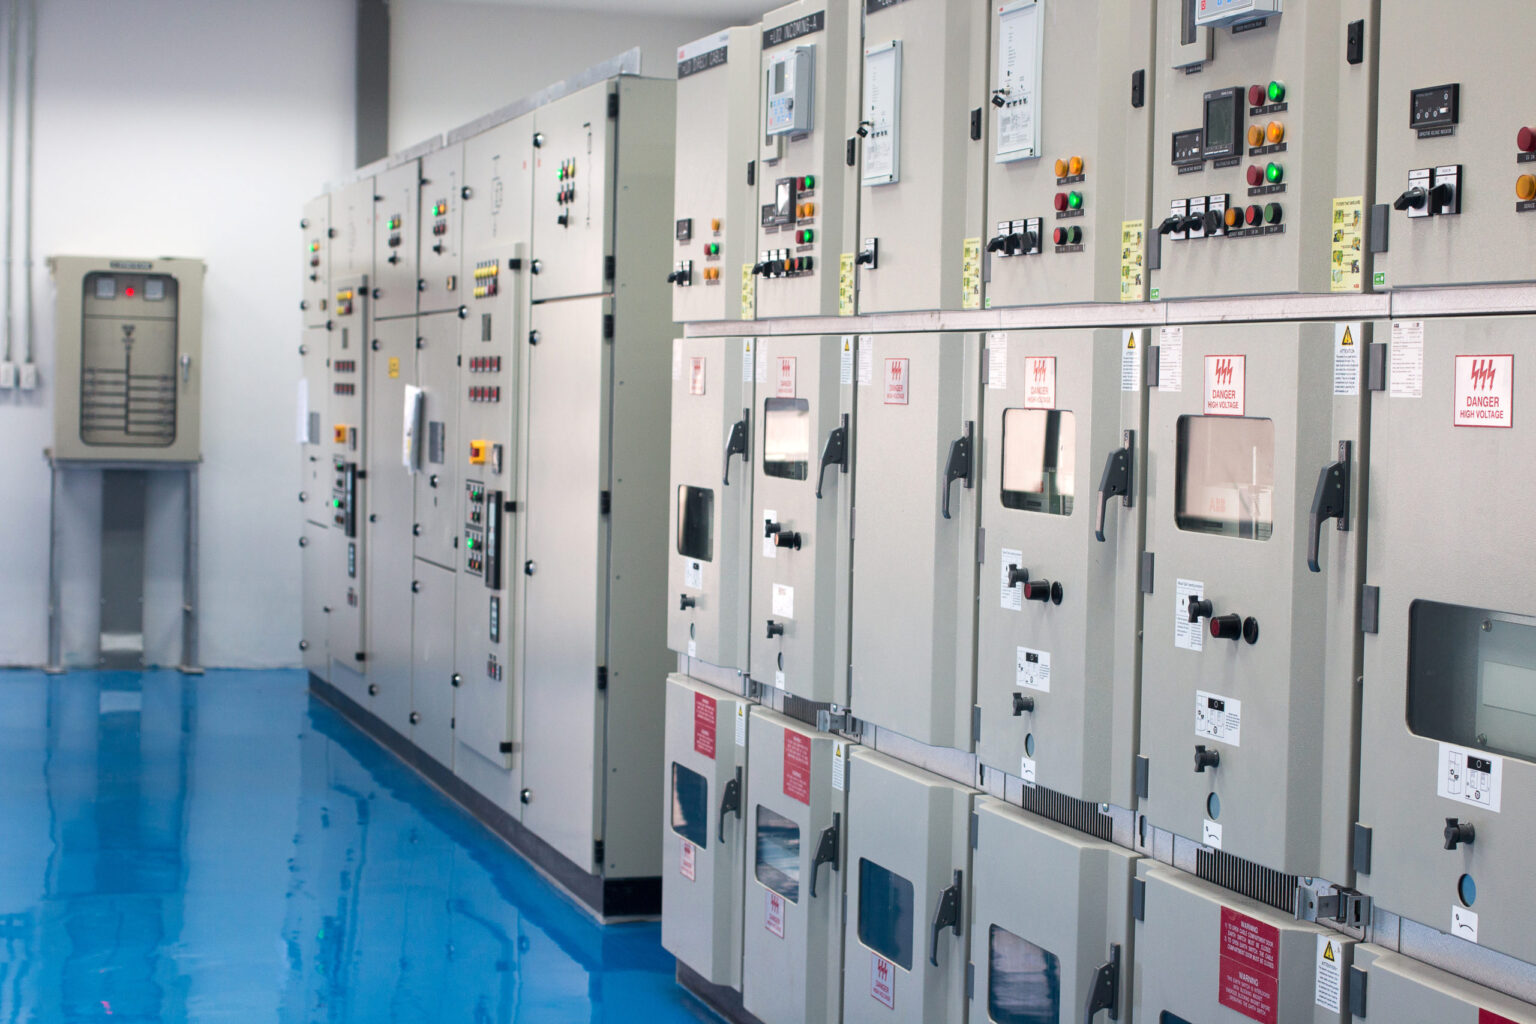 Electrical control cabinet. Electrical power. Motor control. Temperature control.